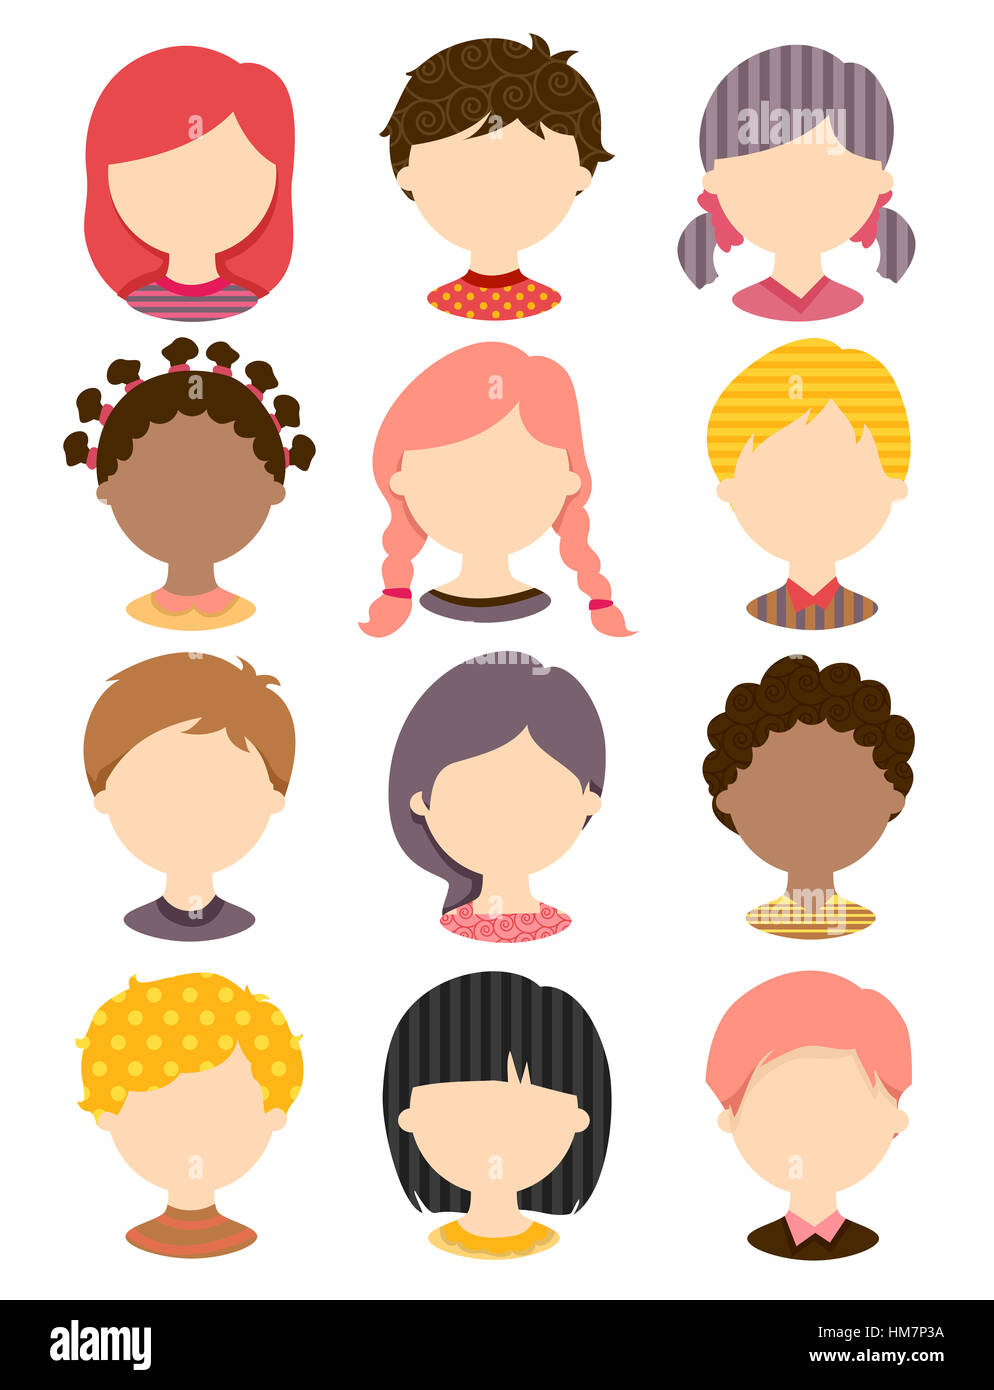 Illustration Featuring Templates of Popular Haircuts for Children Stock Photo